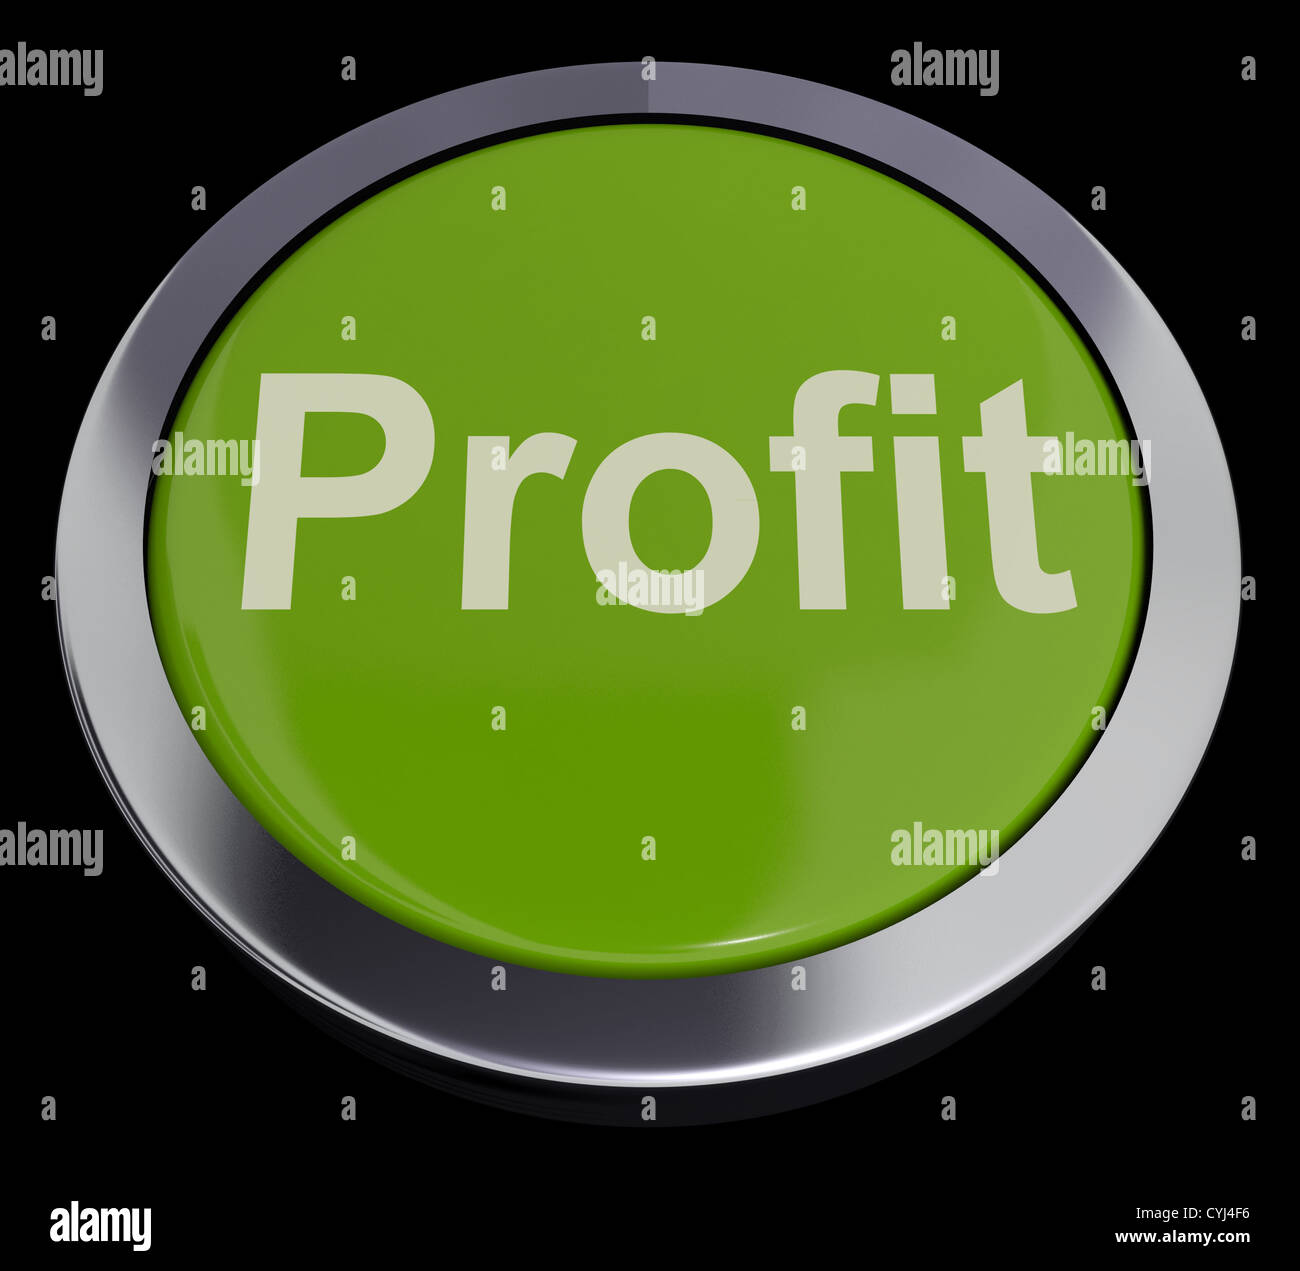 Profit Computer Button In Green Showing Earnings And Investments Stock Photo